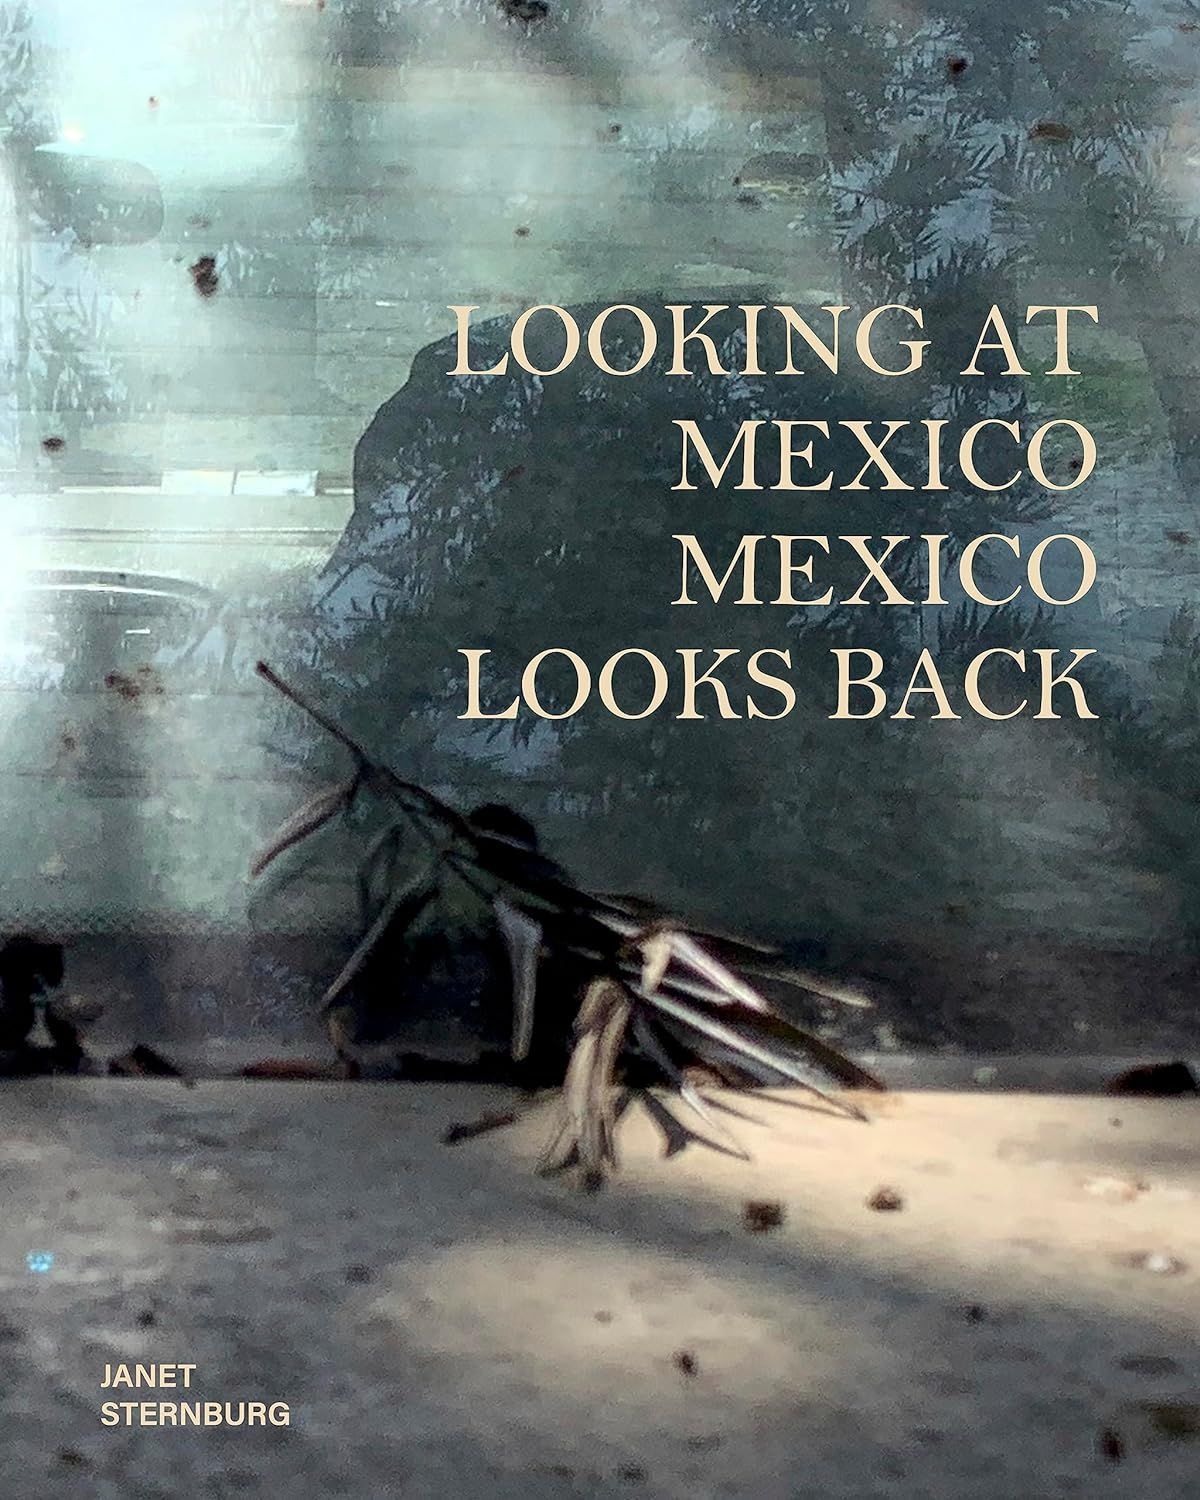 Multifaceted Portals of Discovery: On Janet Sternburg’s “Looking at Mexico / Mexico Looks Back”